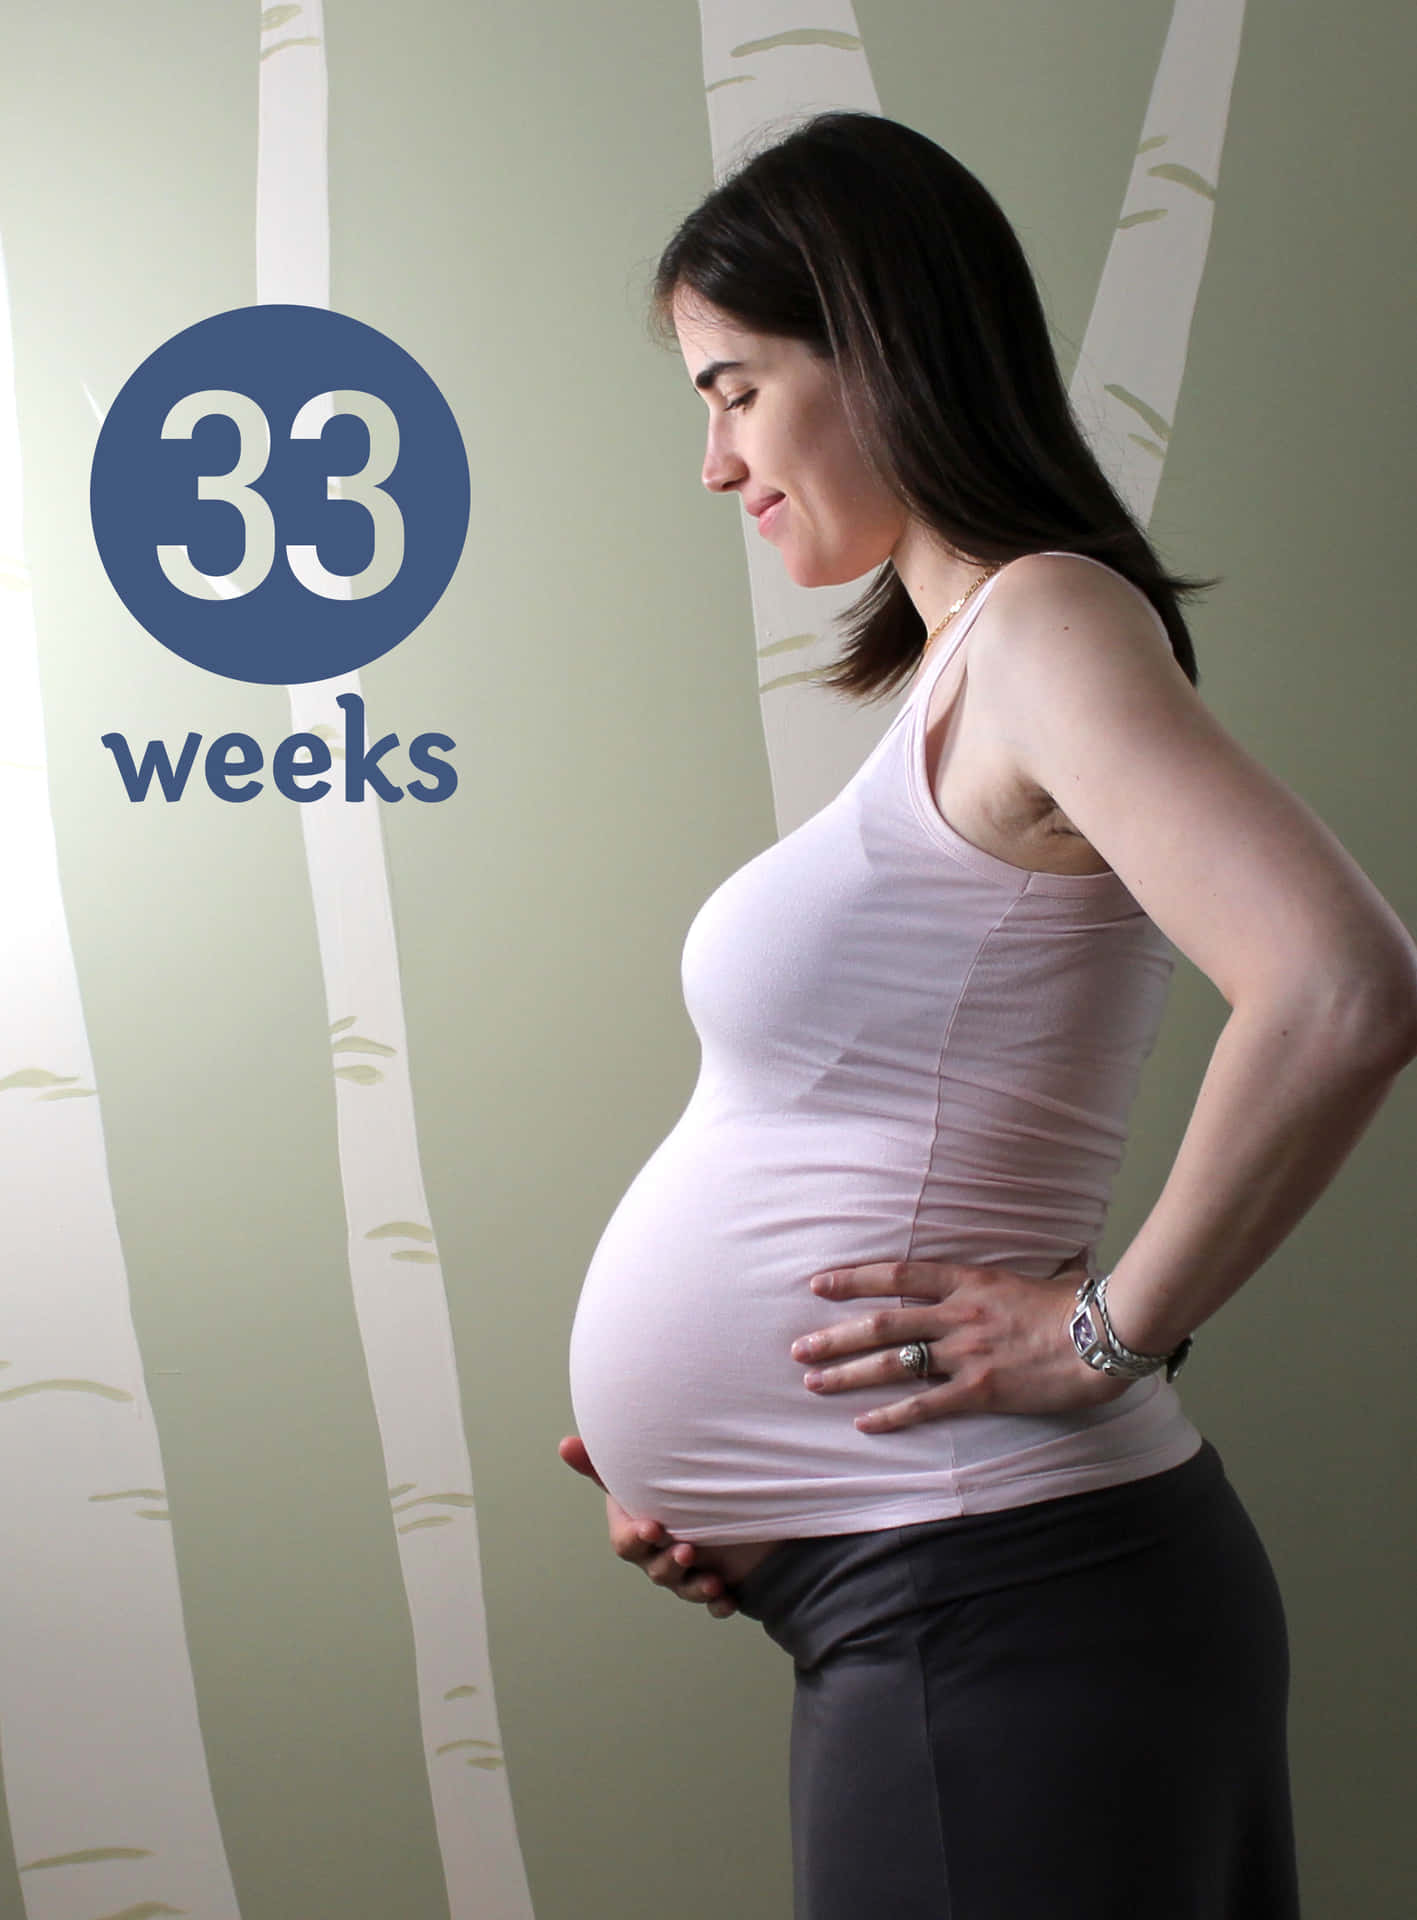 A woman in her third trimester of pregnancy, feeling the joy of new life.